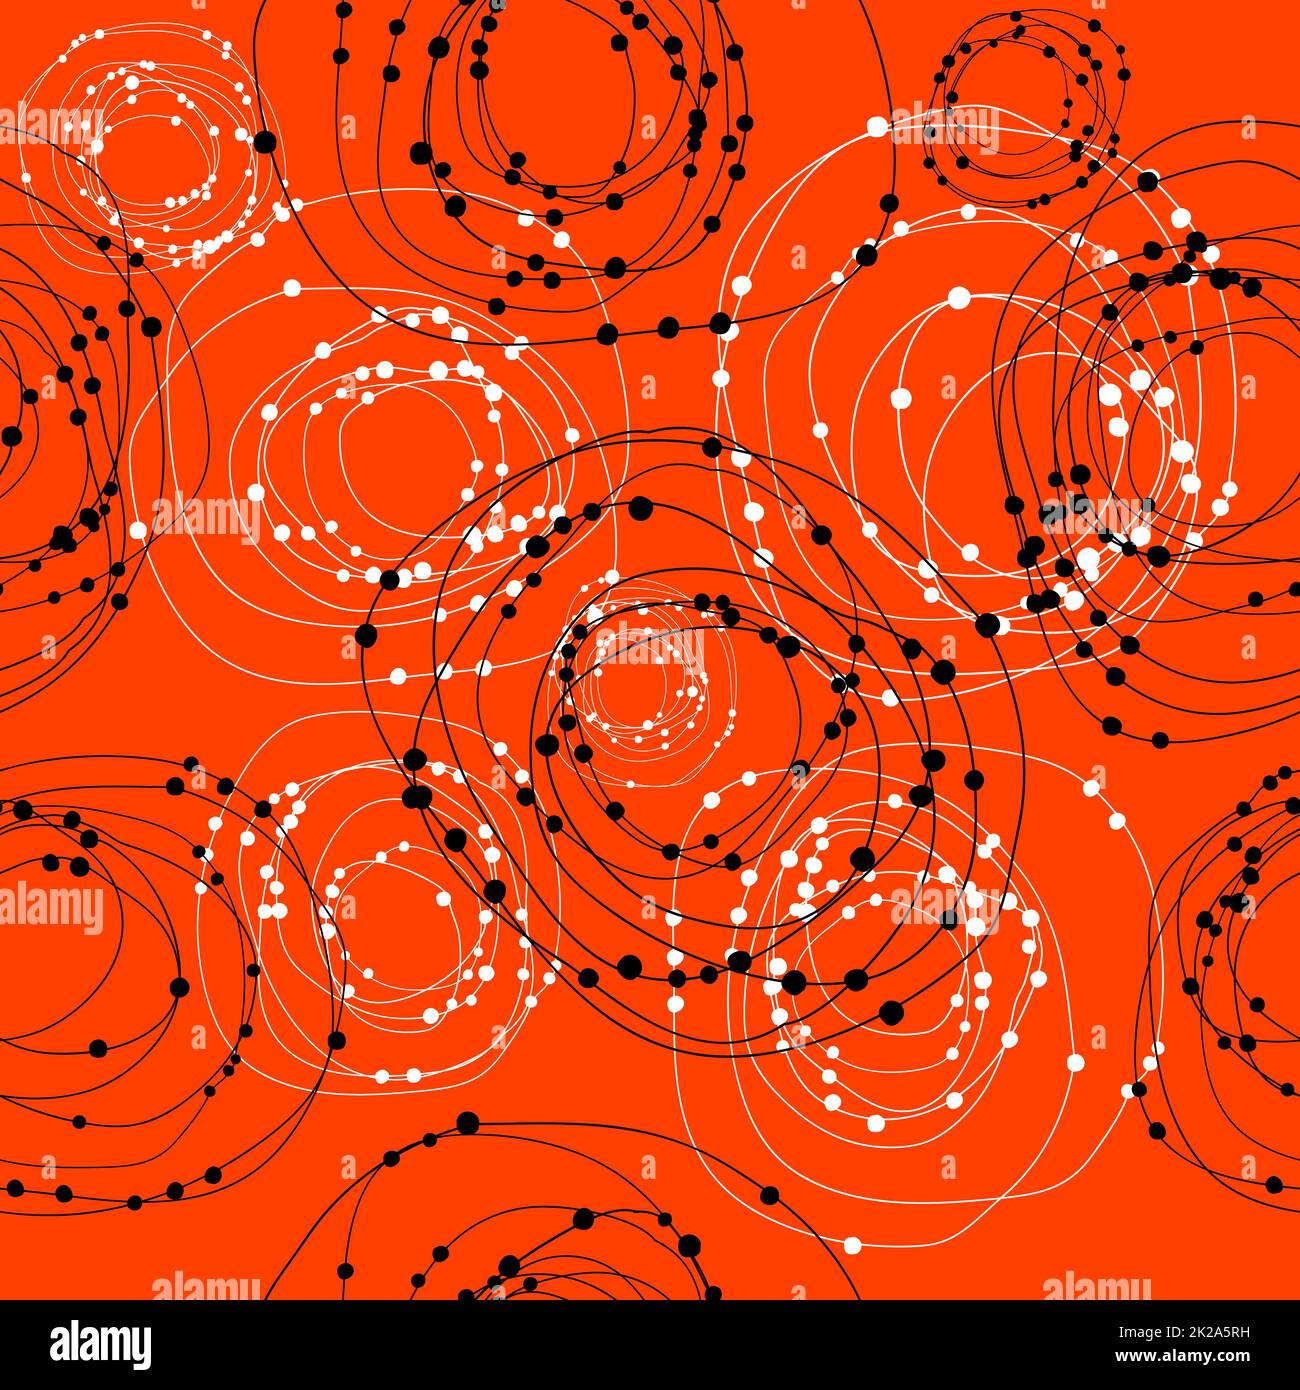 Doodle black and white concentric circles with dots seamless pattern over red background Stock Photo